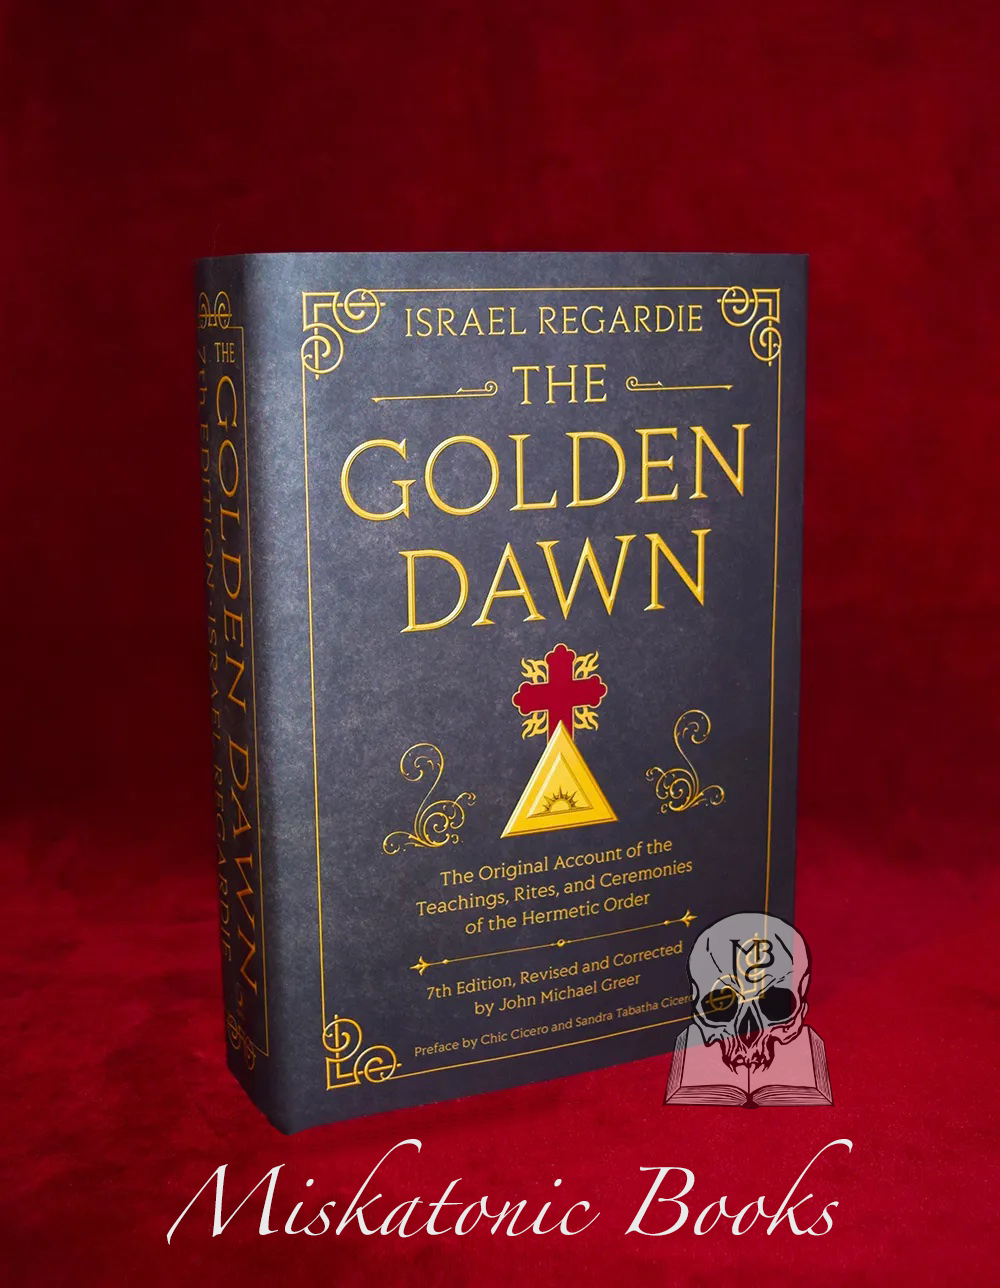 The Golden Dawn: The Original Account of the Teachings, Rites, and Ceremonies of the Hermetic Order by Israel Regardie edited by John Michael Greer (Hardcover Edition)